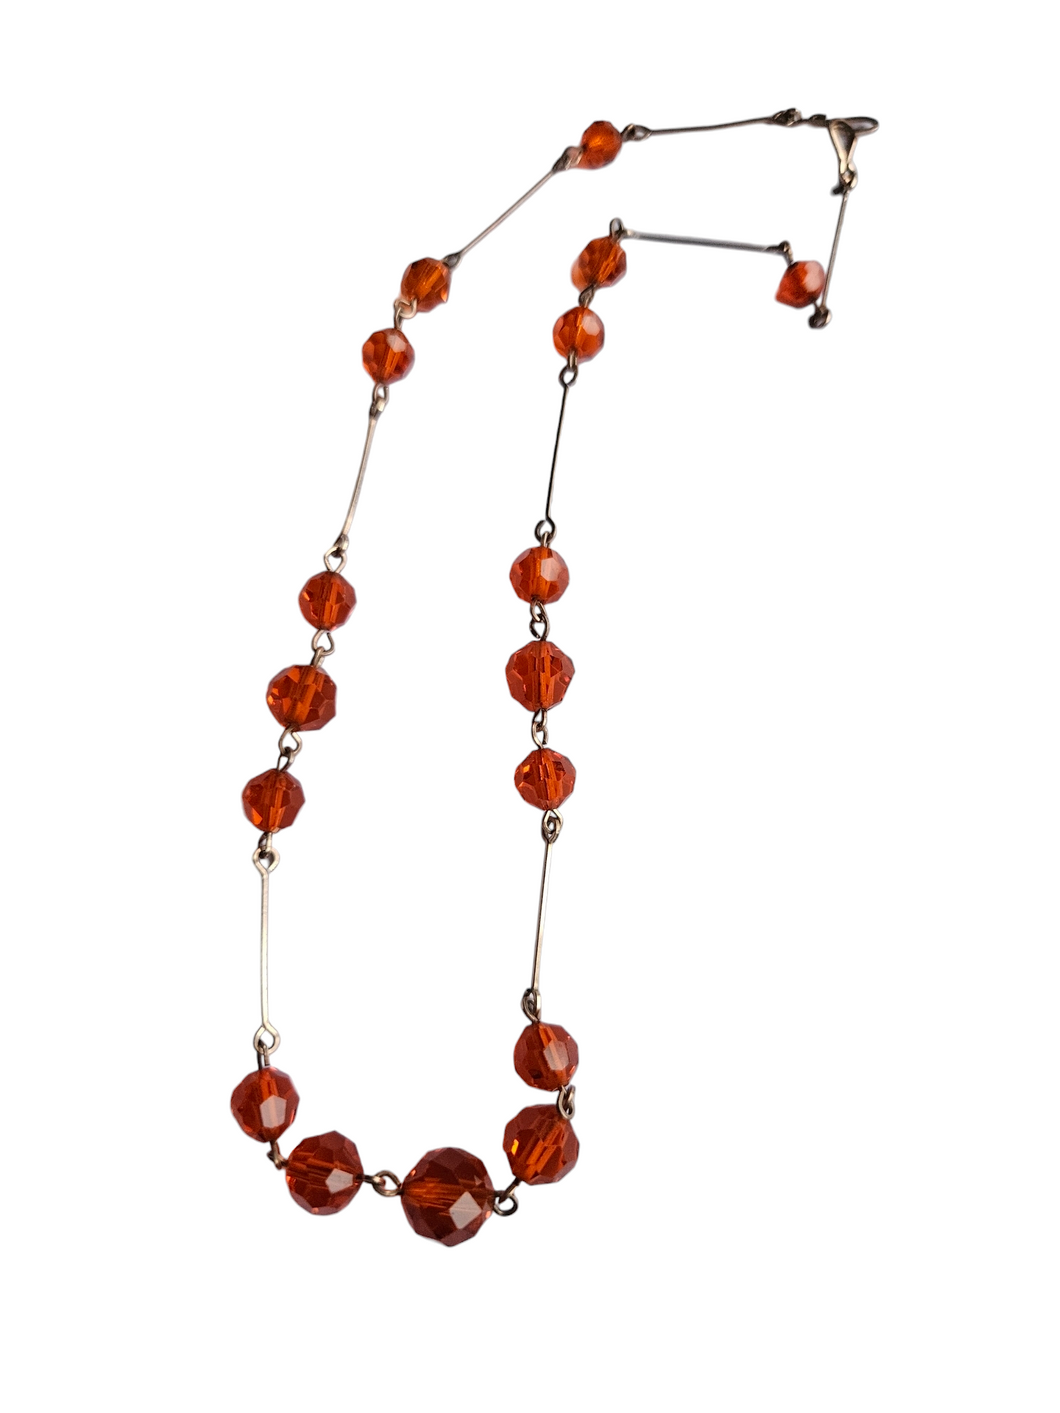 1920s/1930s Bright Orange Glass and Rolled Wire Necklace